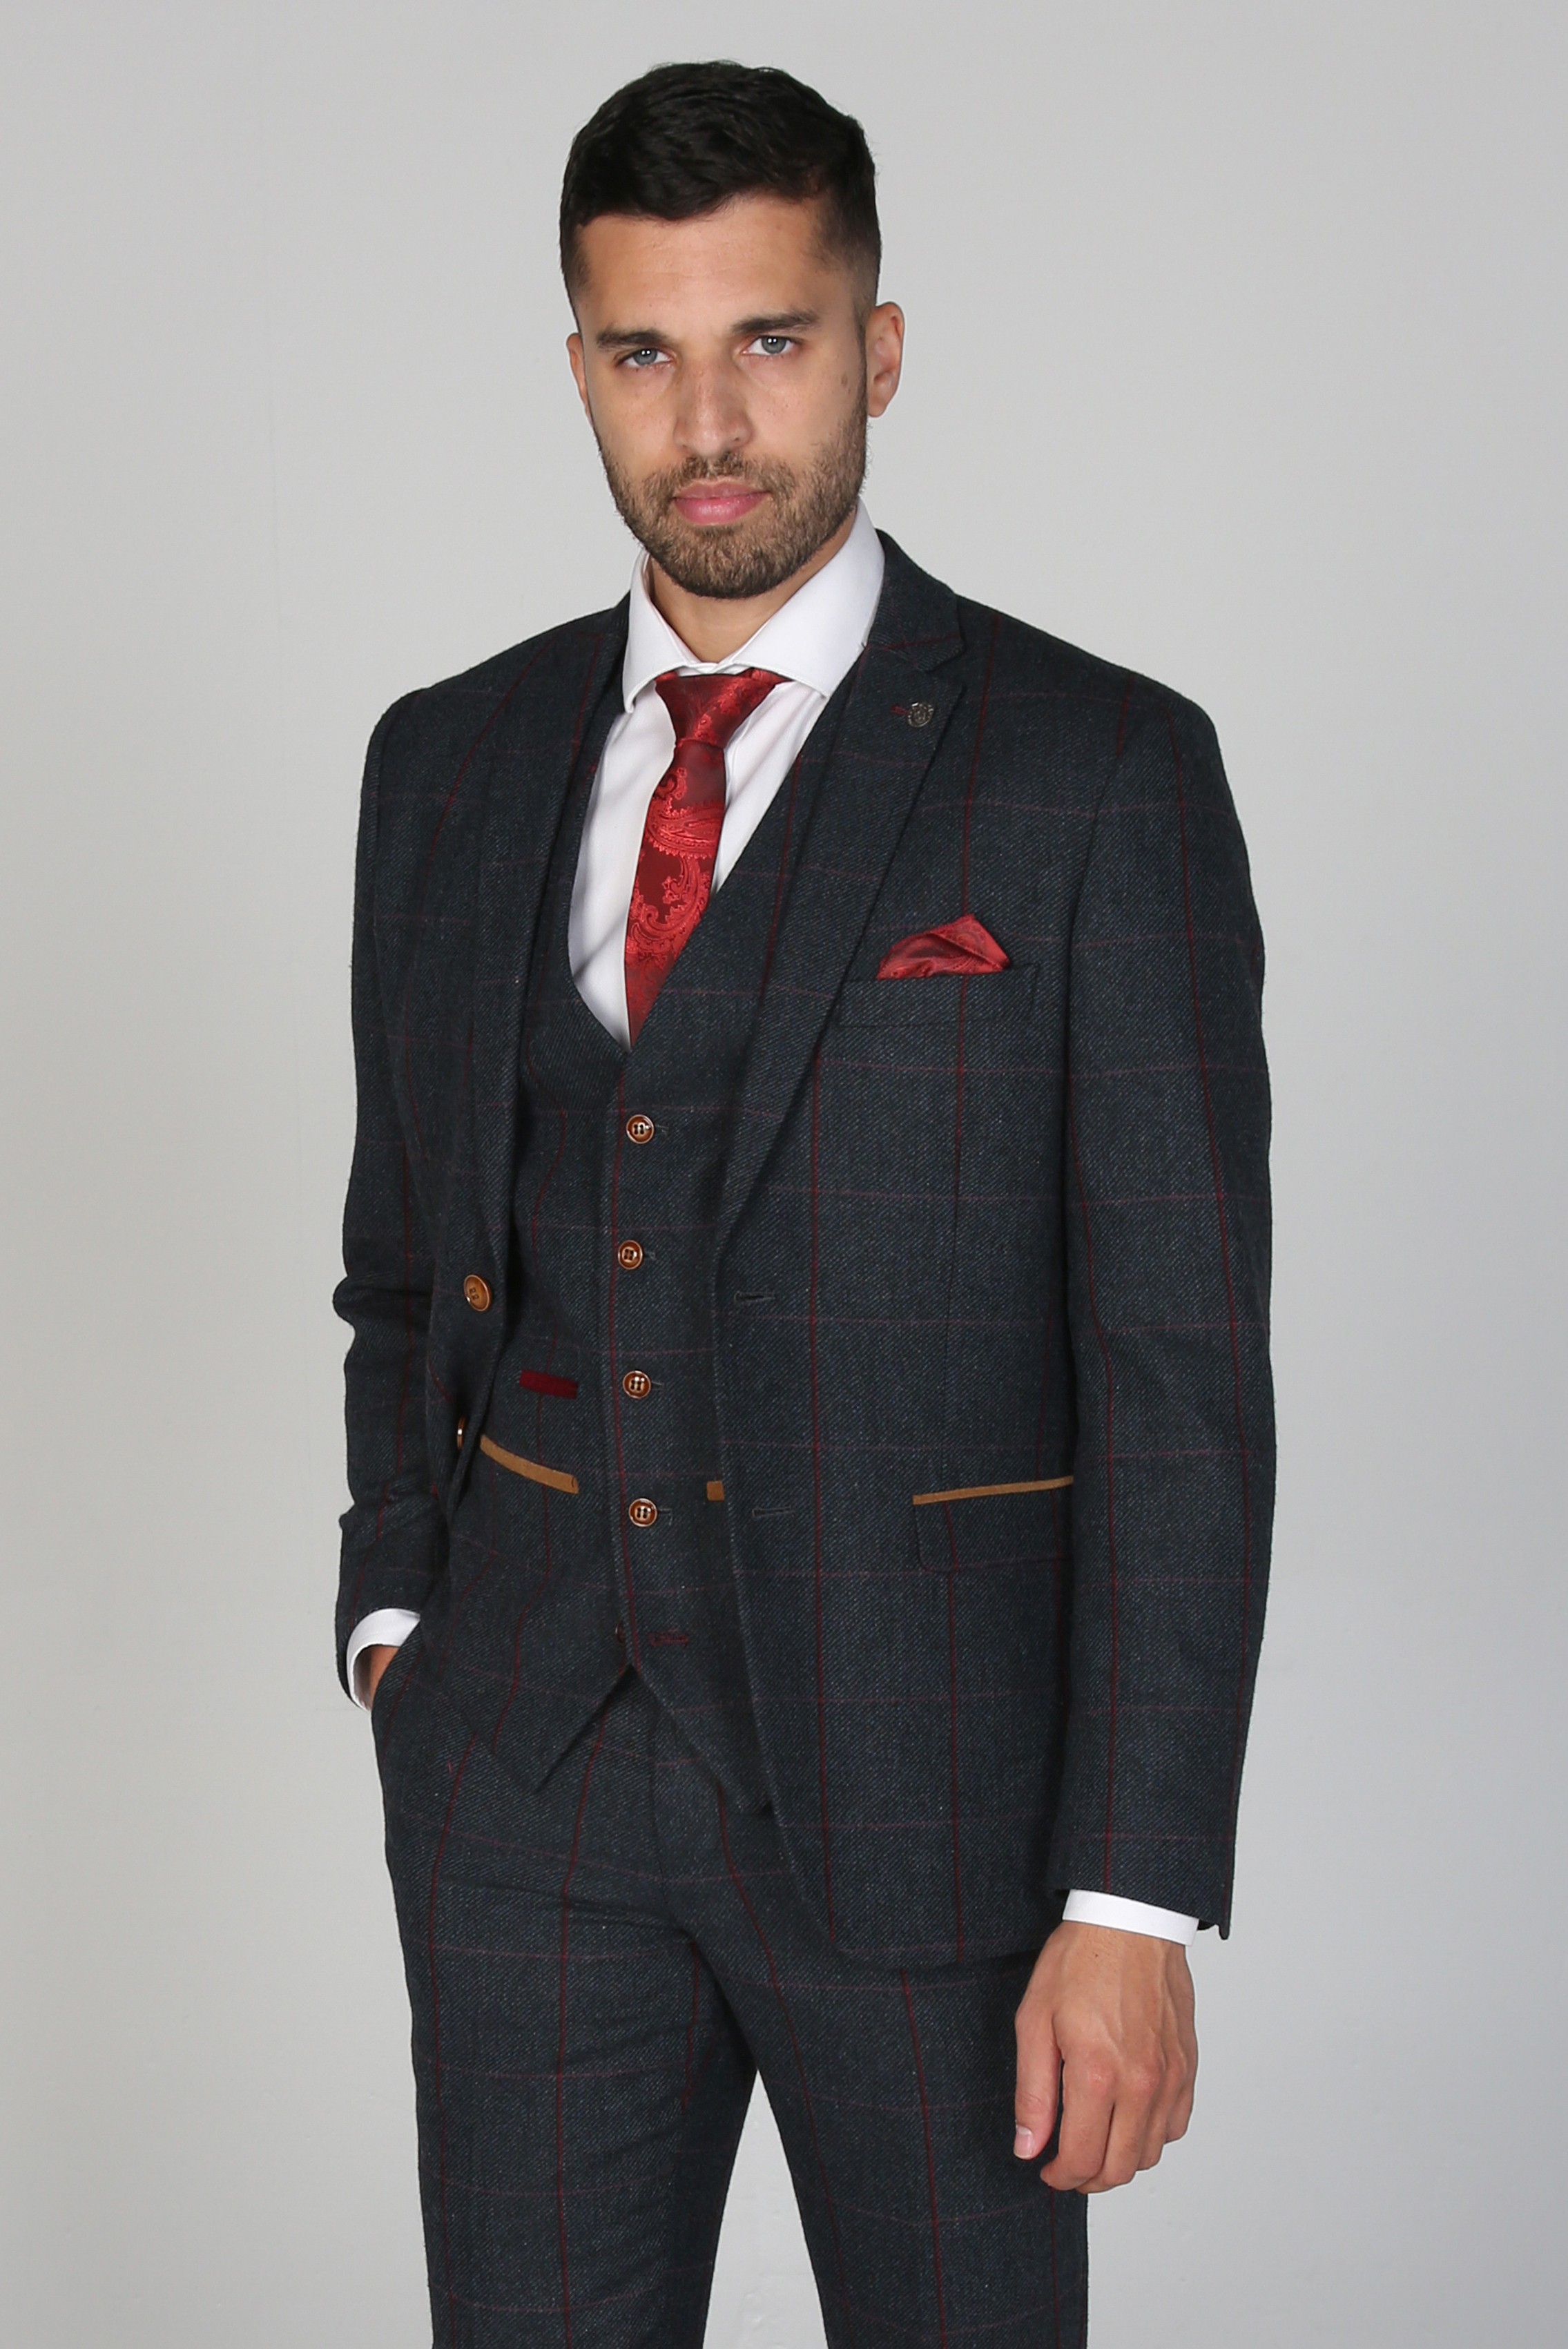 Men's Tweed Windowpane Check Tailored Fit Suit - MADRID  - Navy Blue